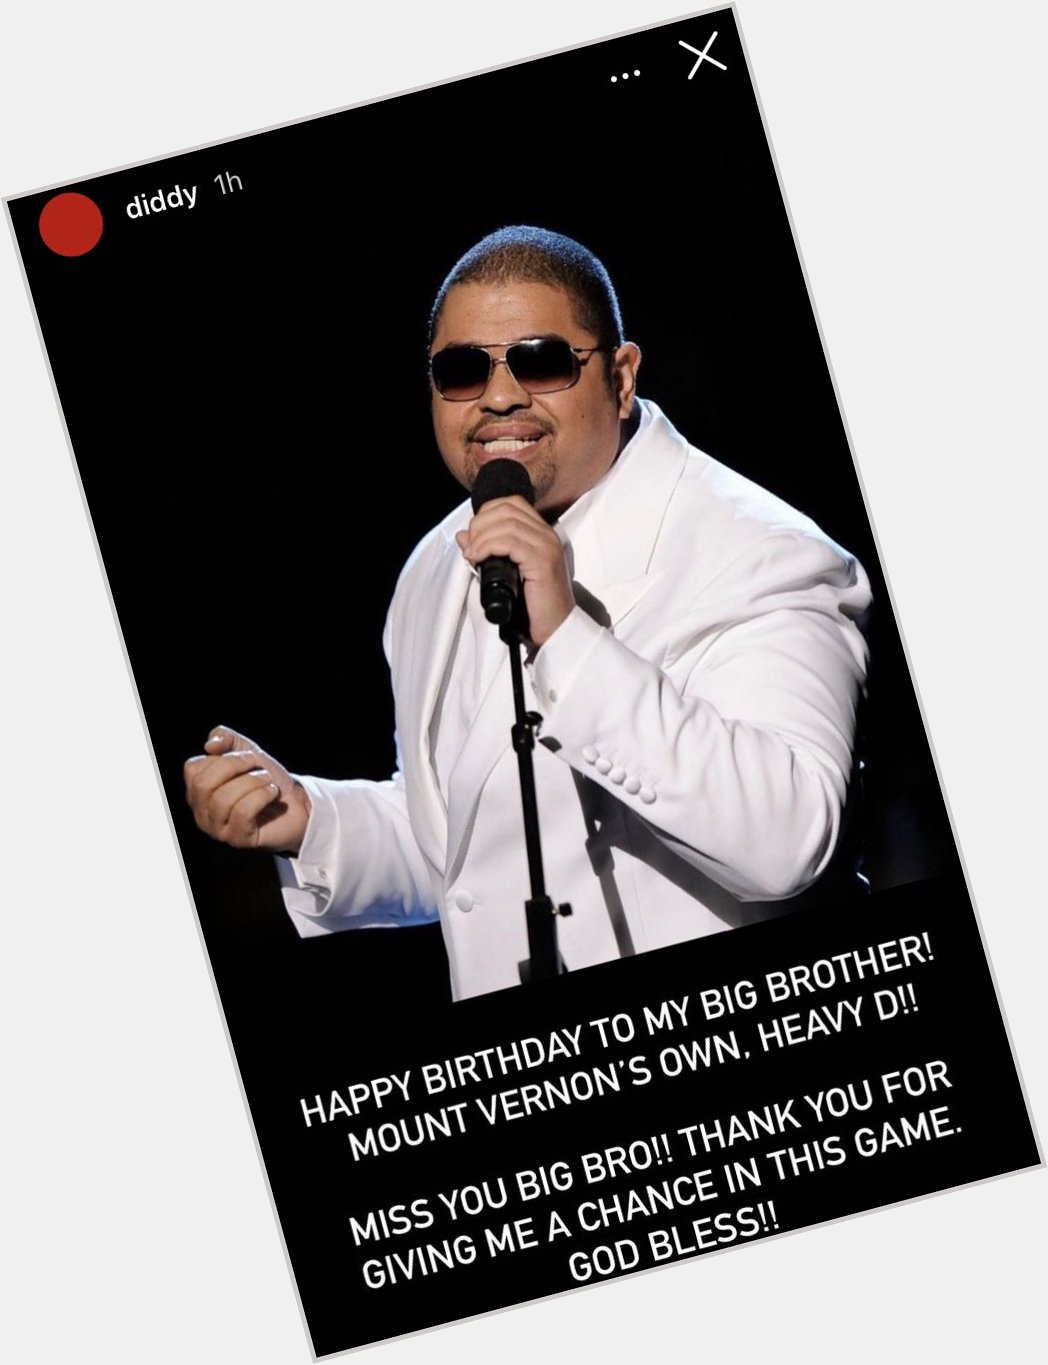 Diddy sends a Happy Heavenly Birthday to the late Heavy D 